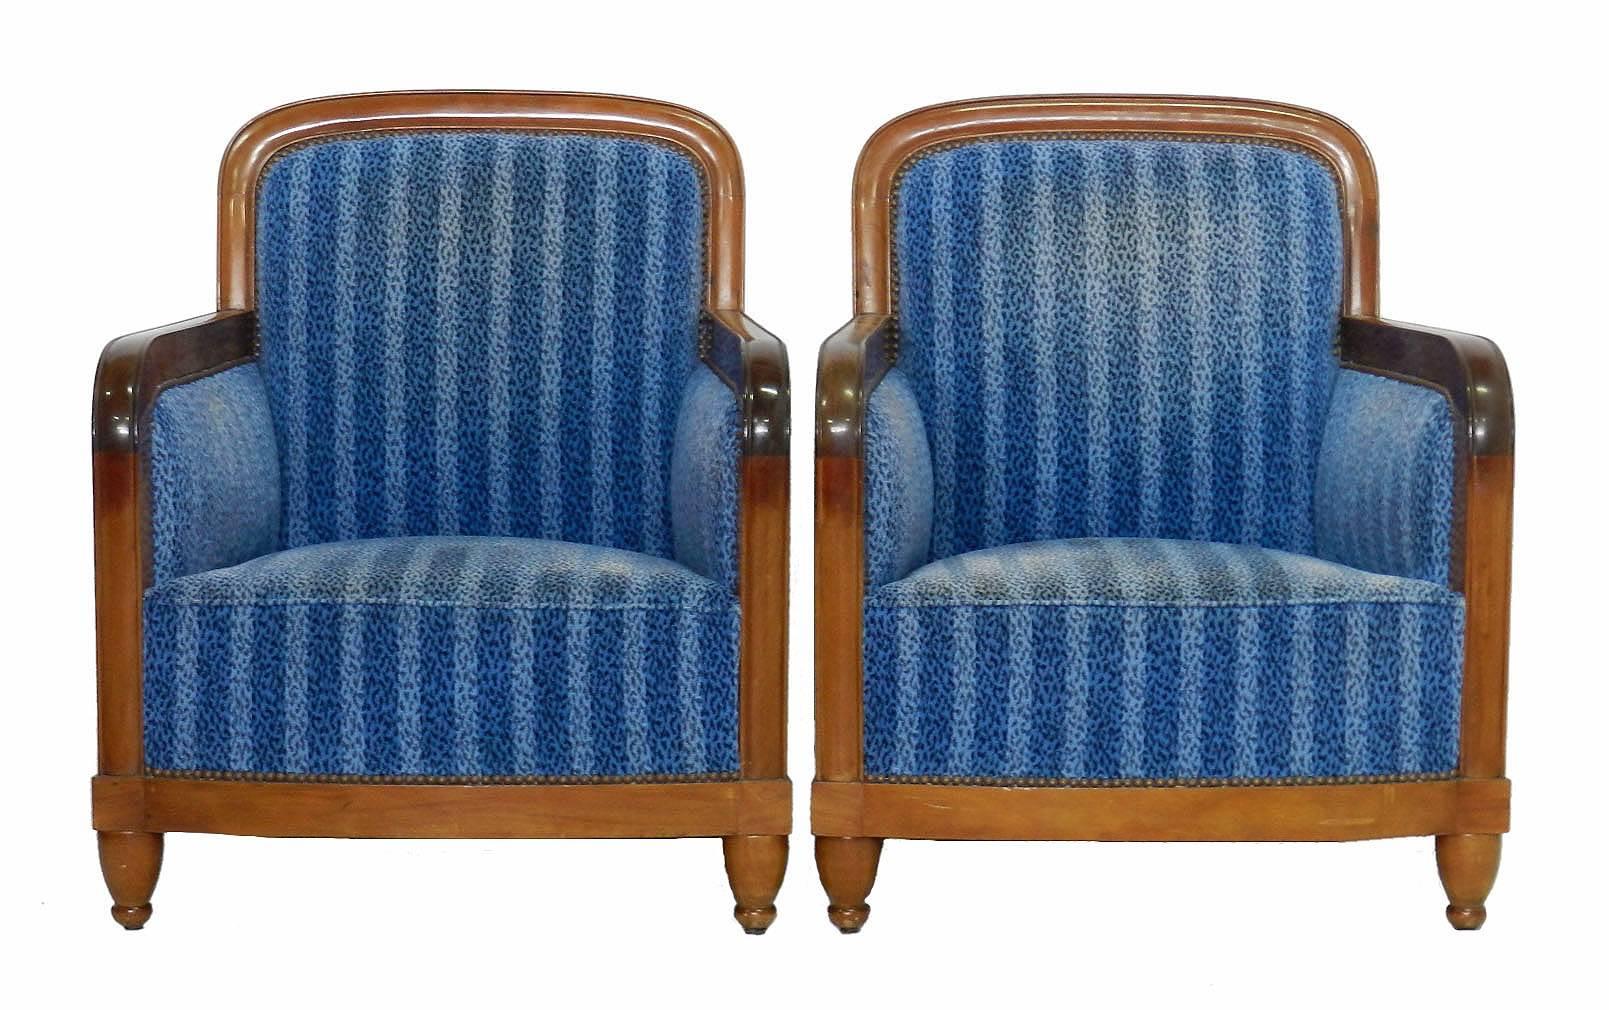 Pair of French Art Deco club chairs, circa 1930
Two armchairs
Mahogany in lovely condition
Upholstery very good, revised not too long ago sound and solid
Printed velour with only very minor signs of wear
Top covers can be changed to suit your